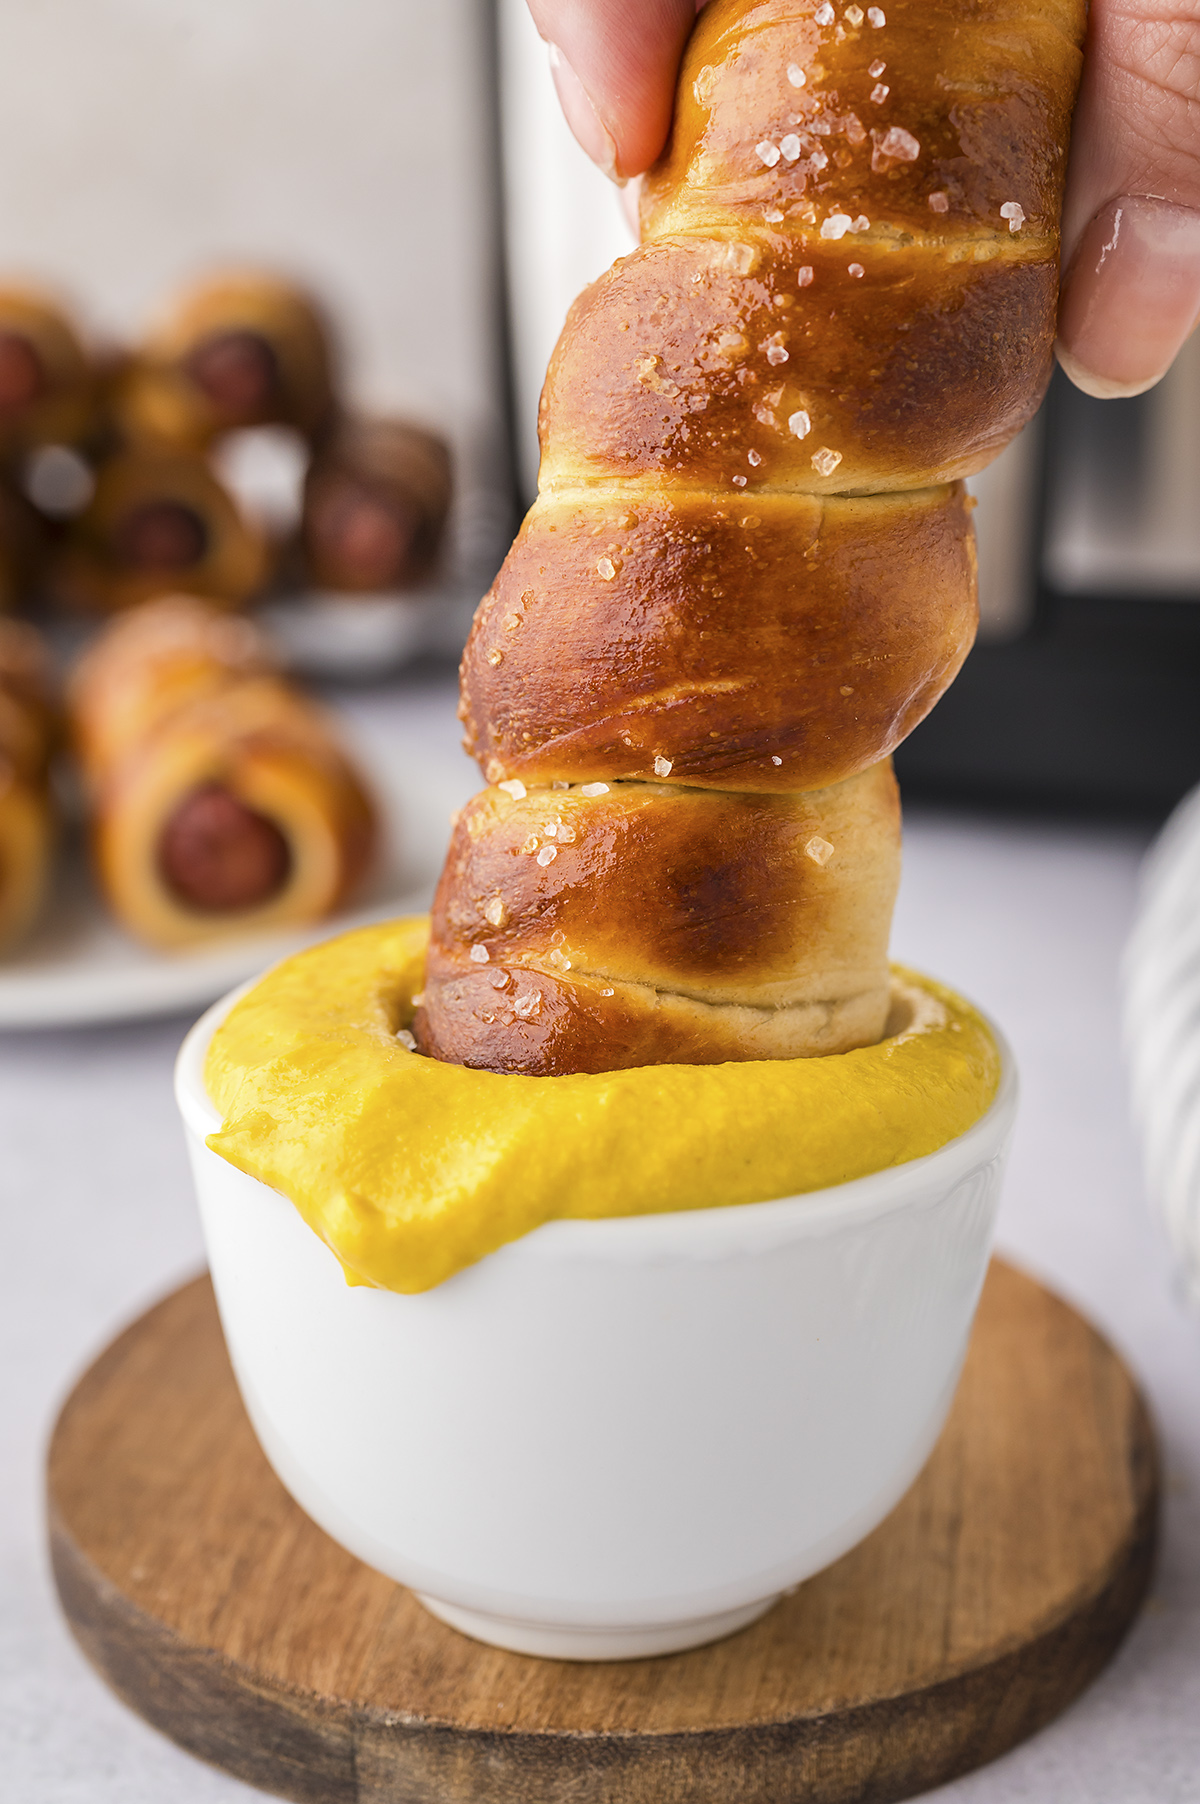 A pretzel dog being dipped into mustard.